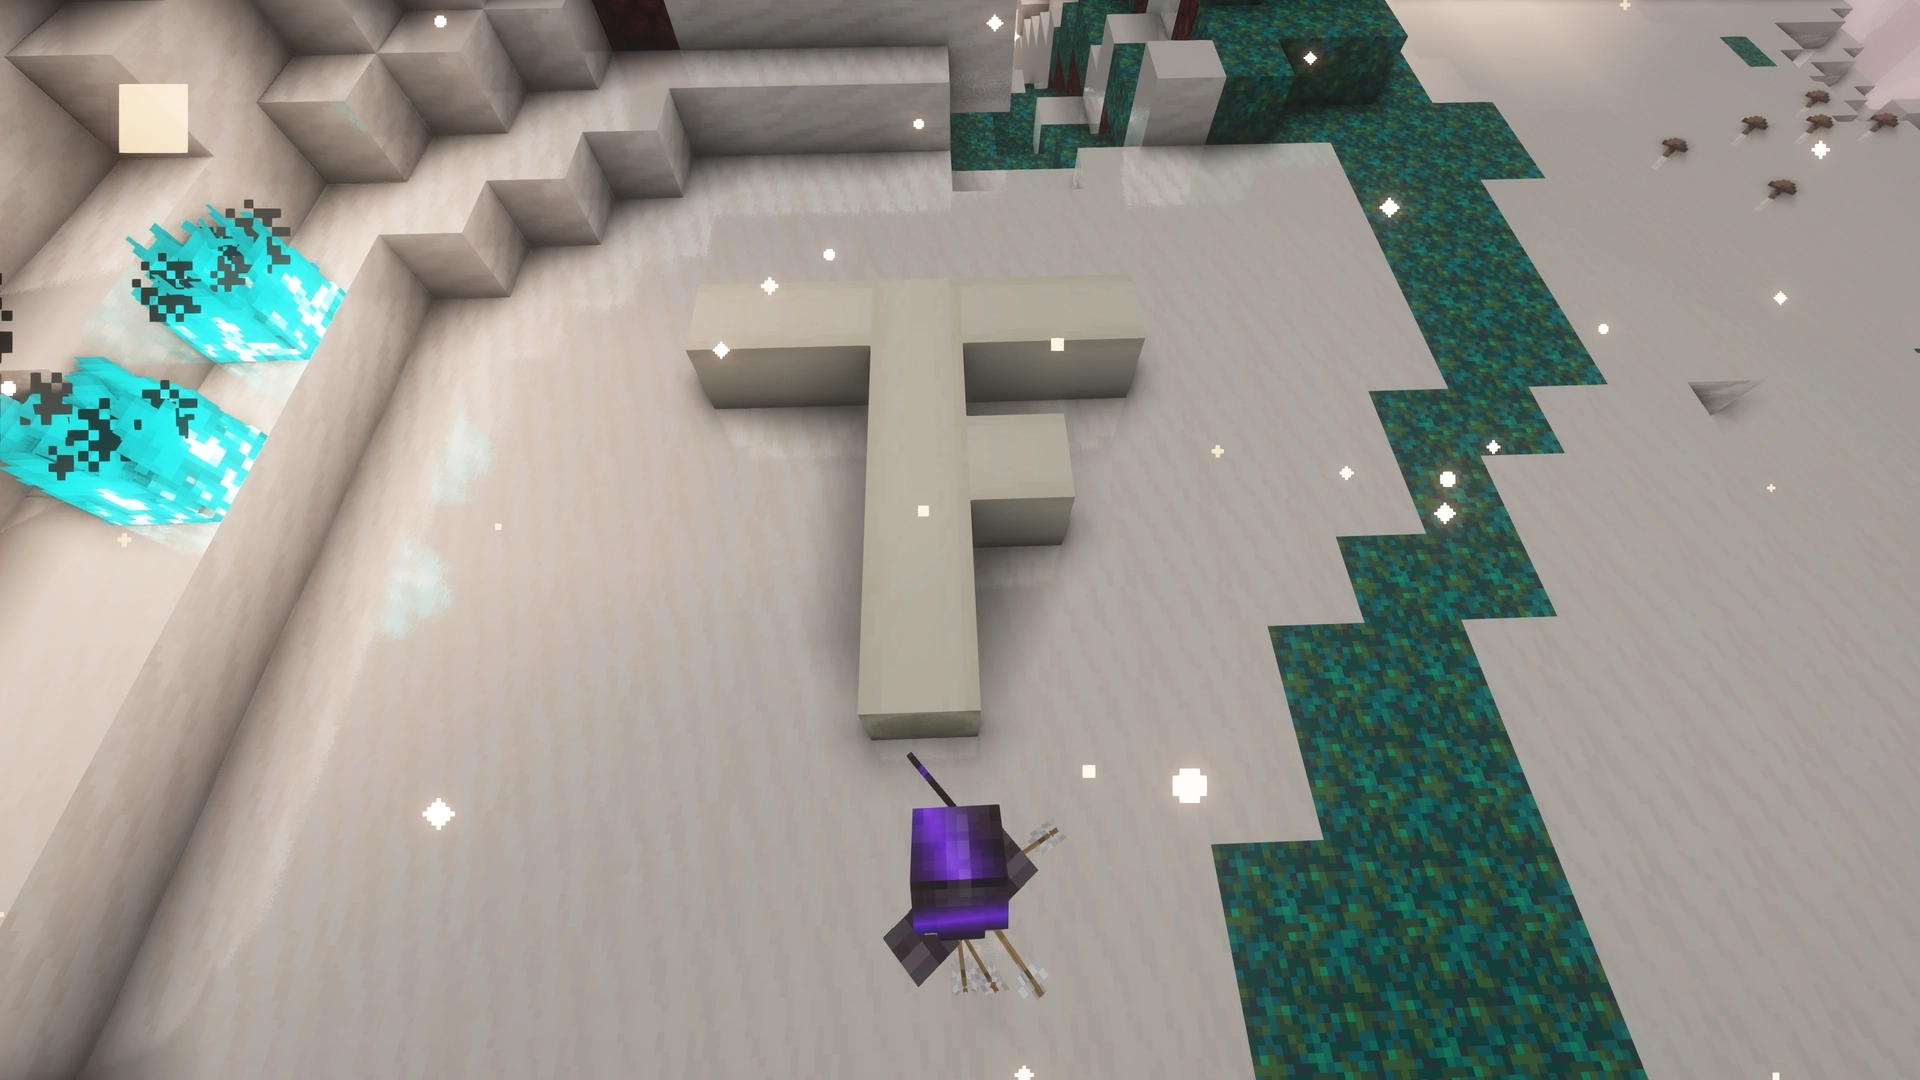 To break up the monotony, this FaZe logo was in a 'Quartz Flats' custom biome from the Incendium datapack